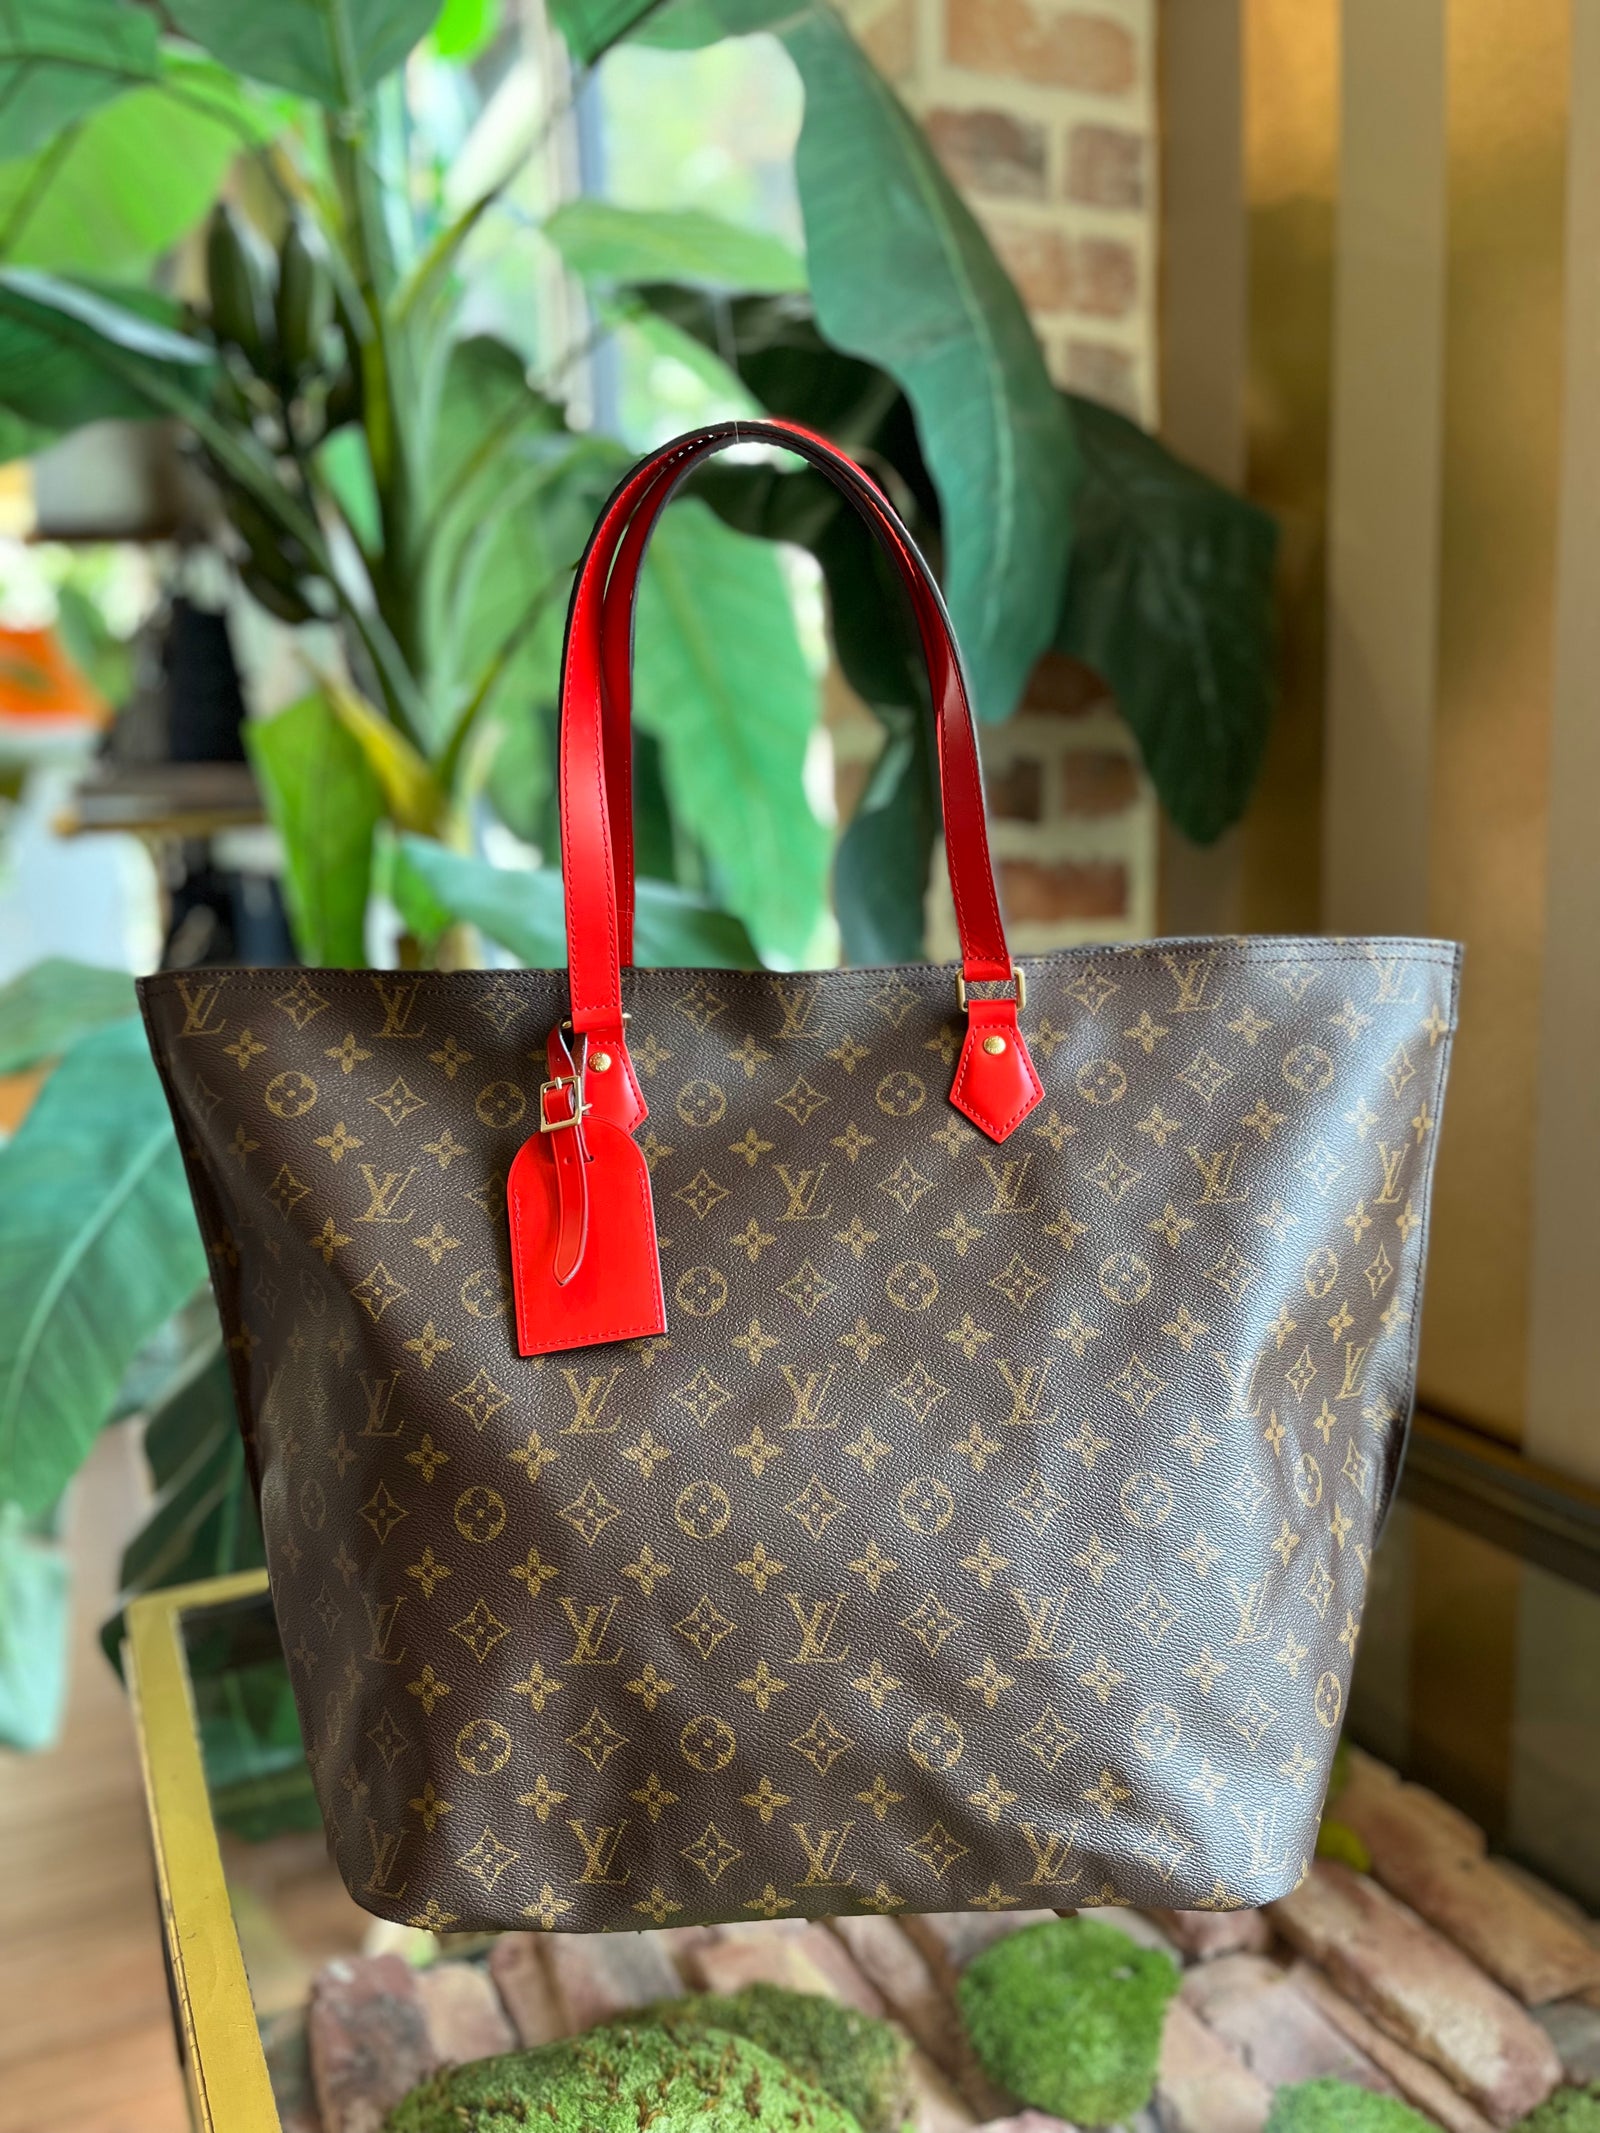 where can i buy authentic louis vuitton bags